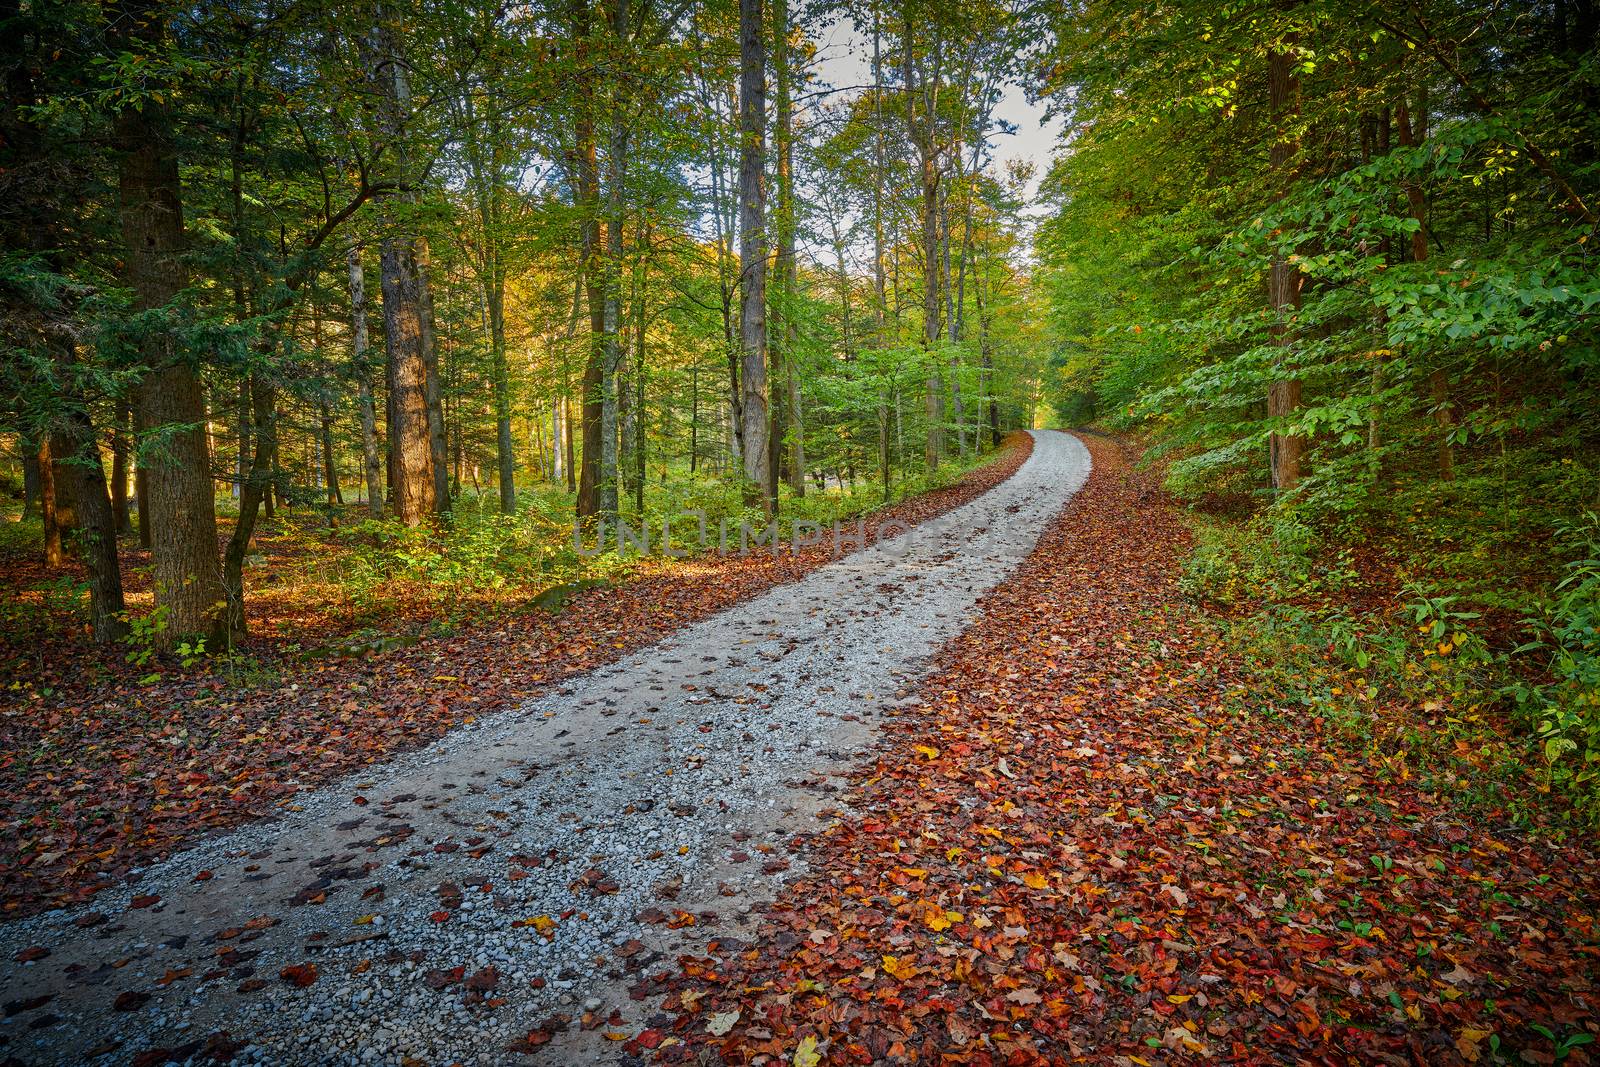 Gravel road in Turkey Foot Campground near McKee, KY. by patrickstock